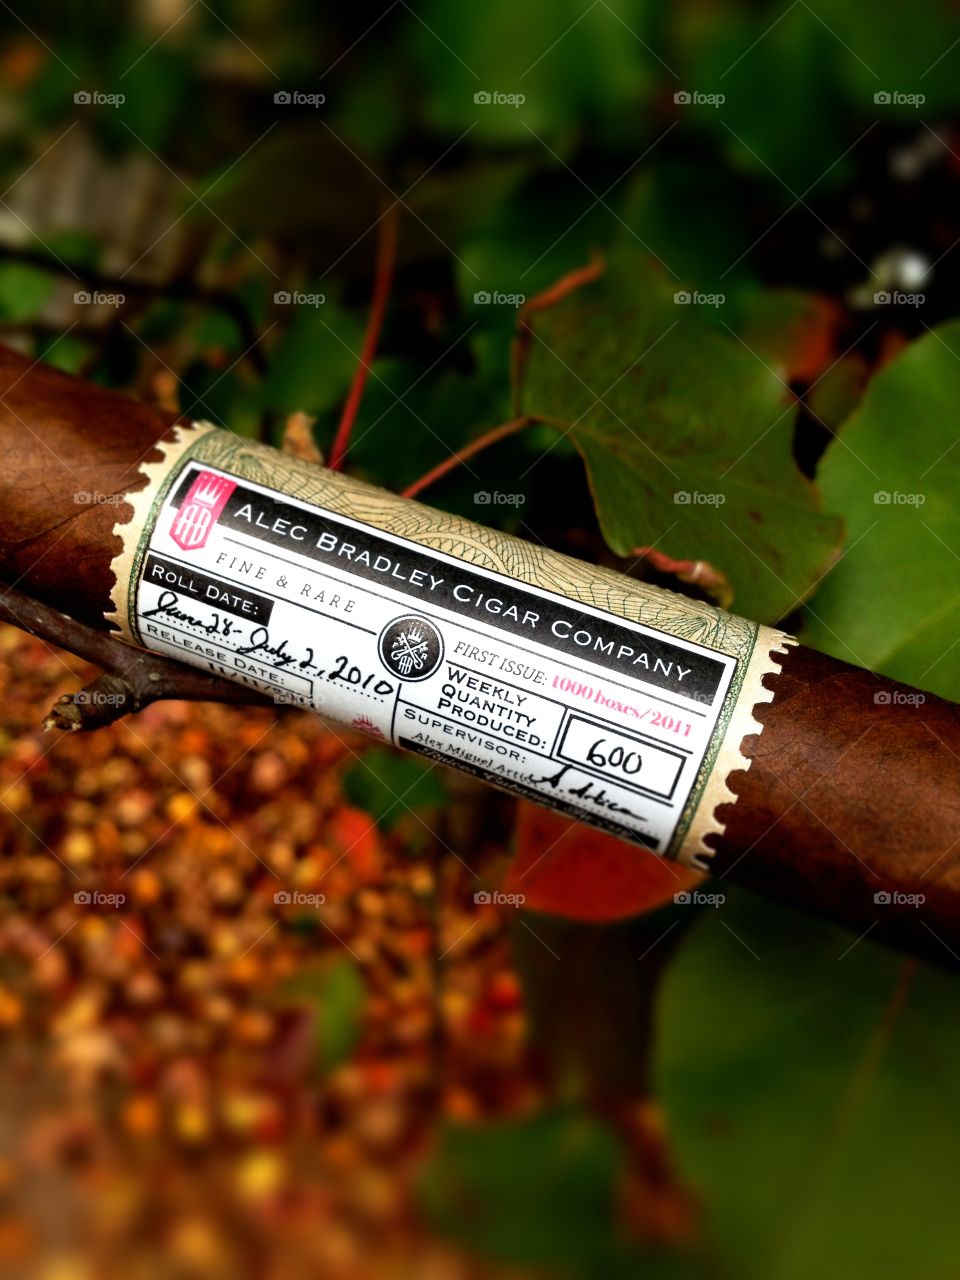 Cigar with large band with tree in background.